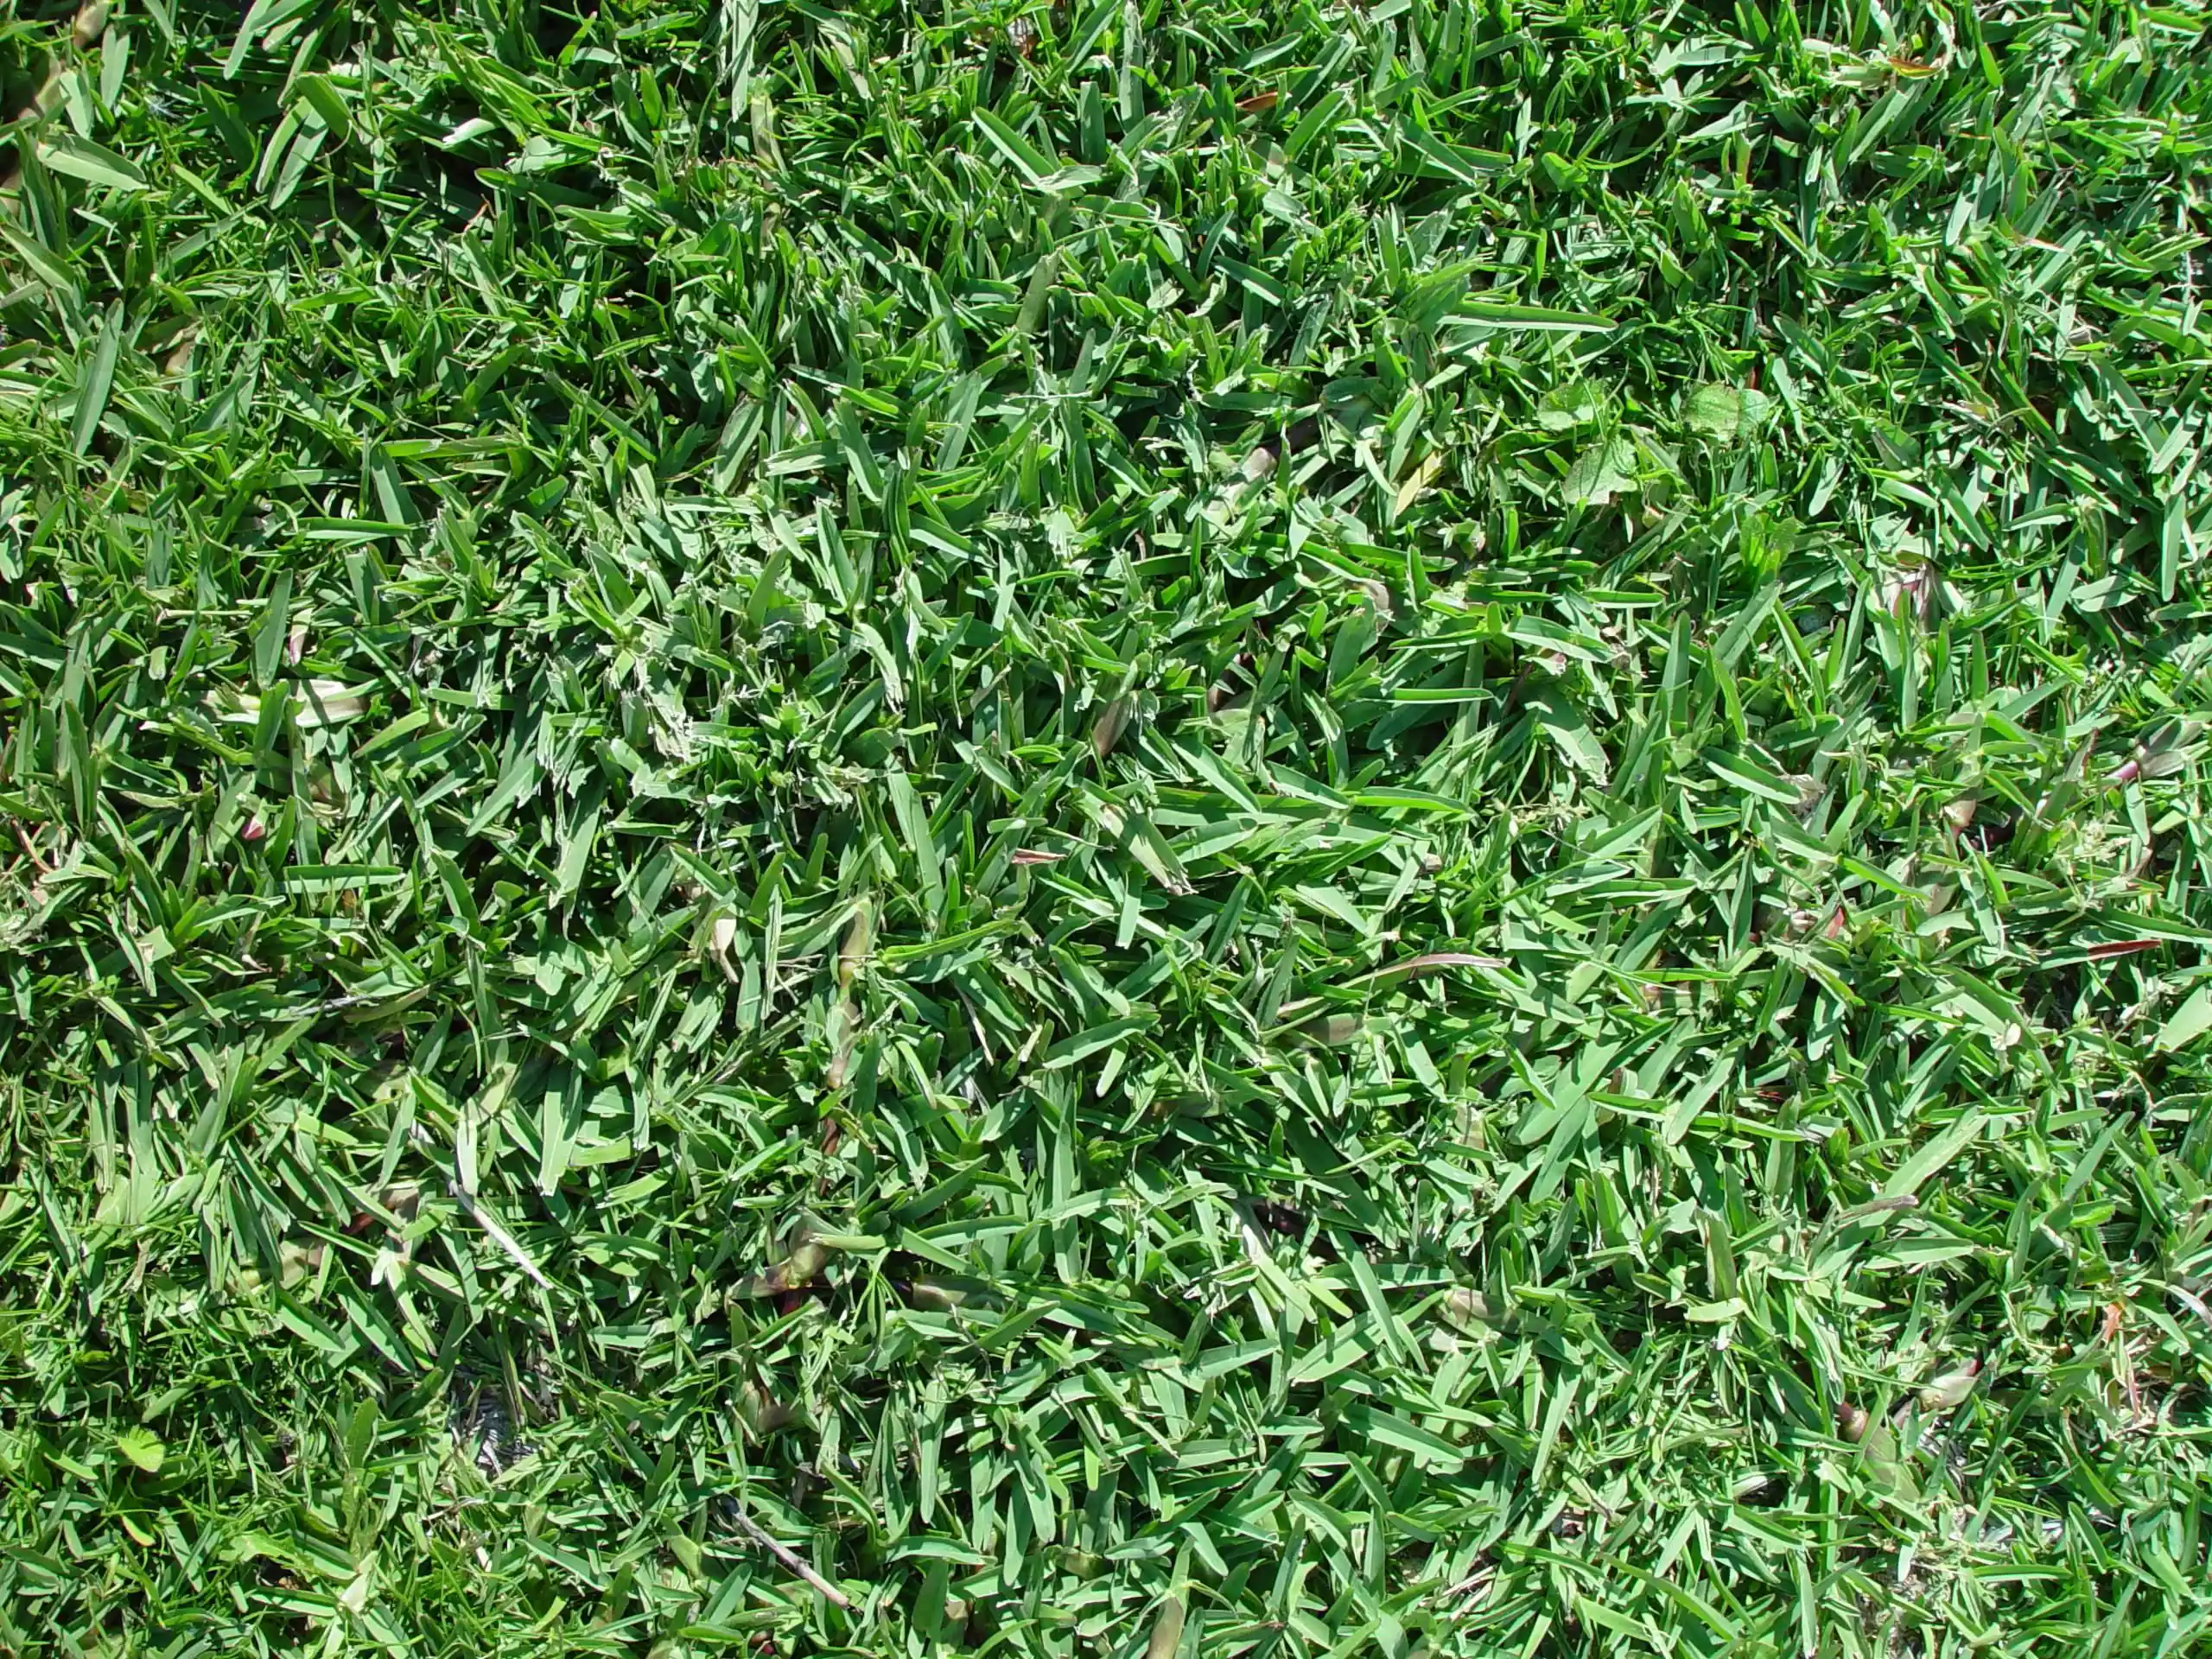 A patch of wide-bladed green grass that has been mowed short